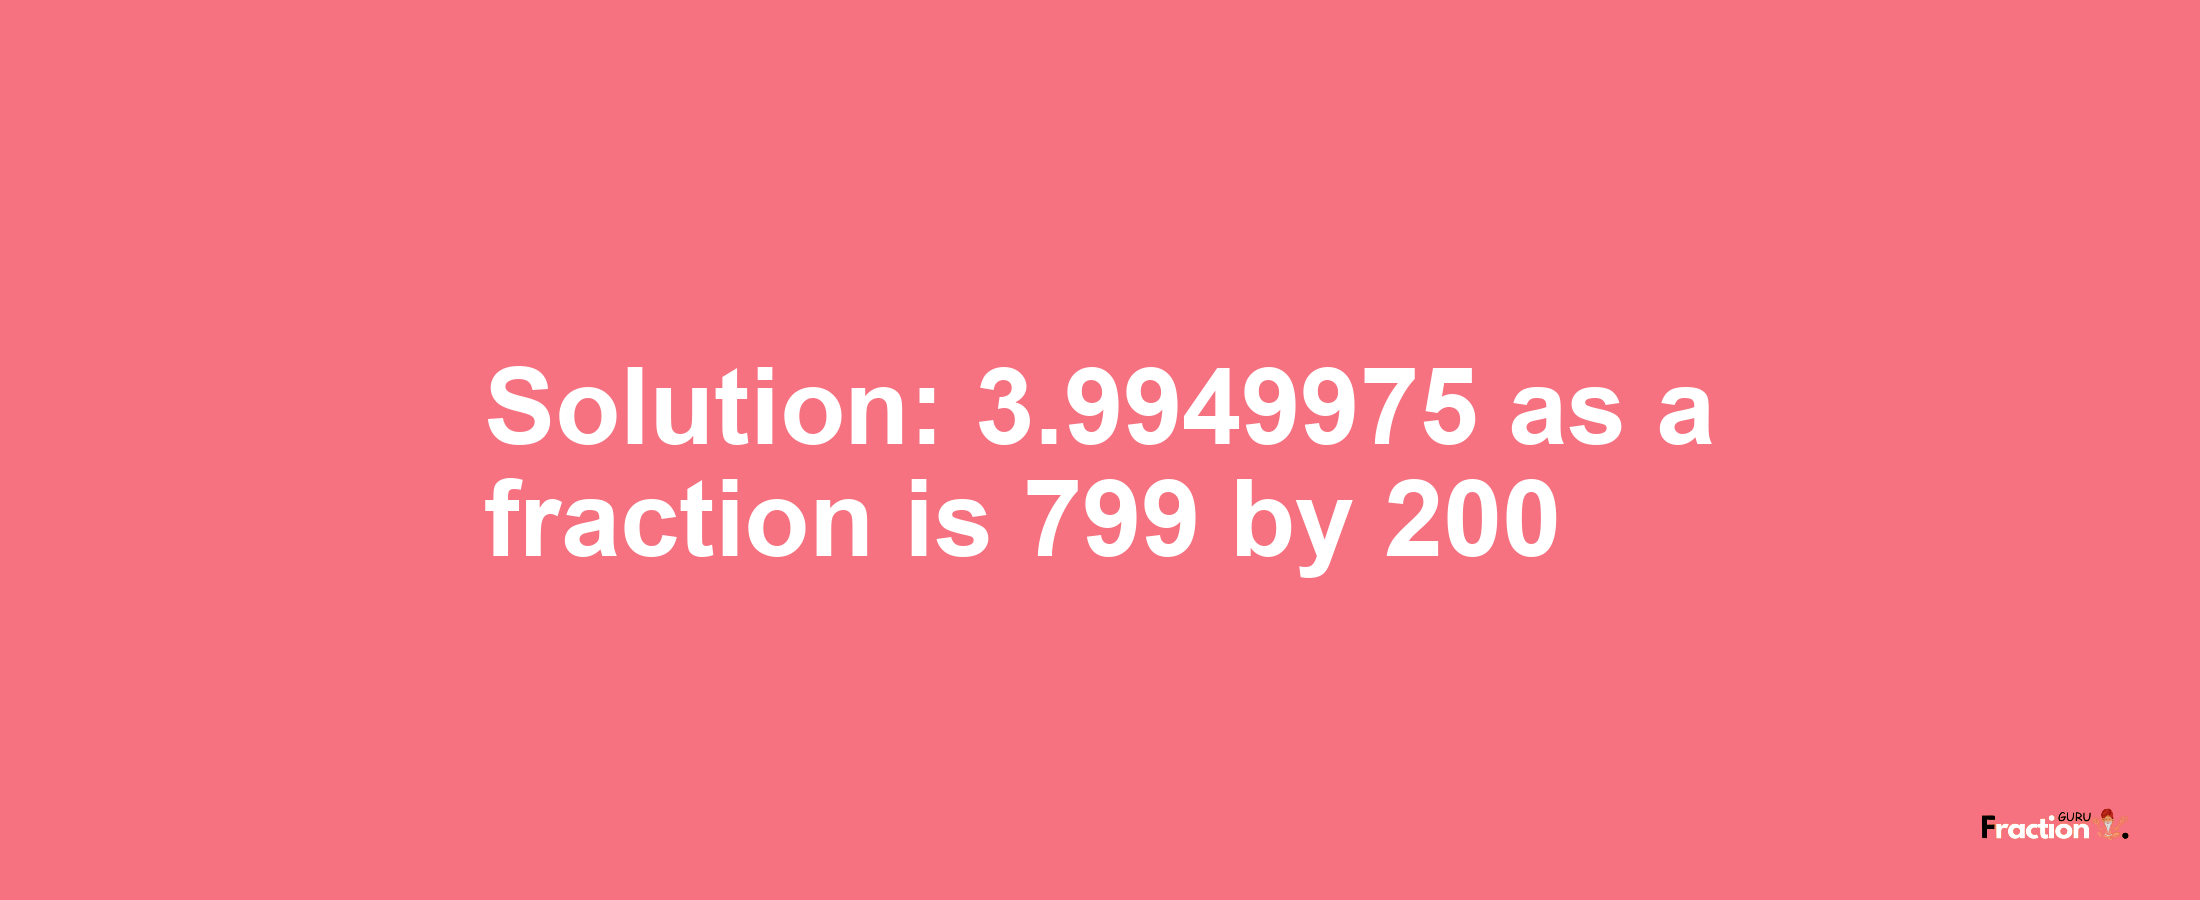 Solution:3.9949975 as a fraction is 799/200